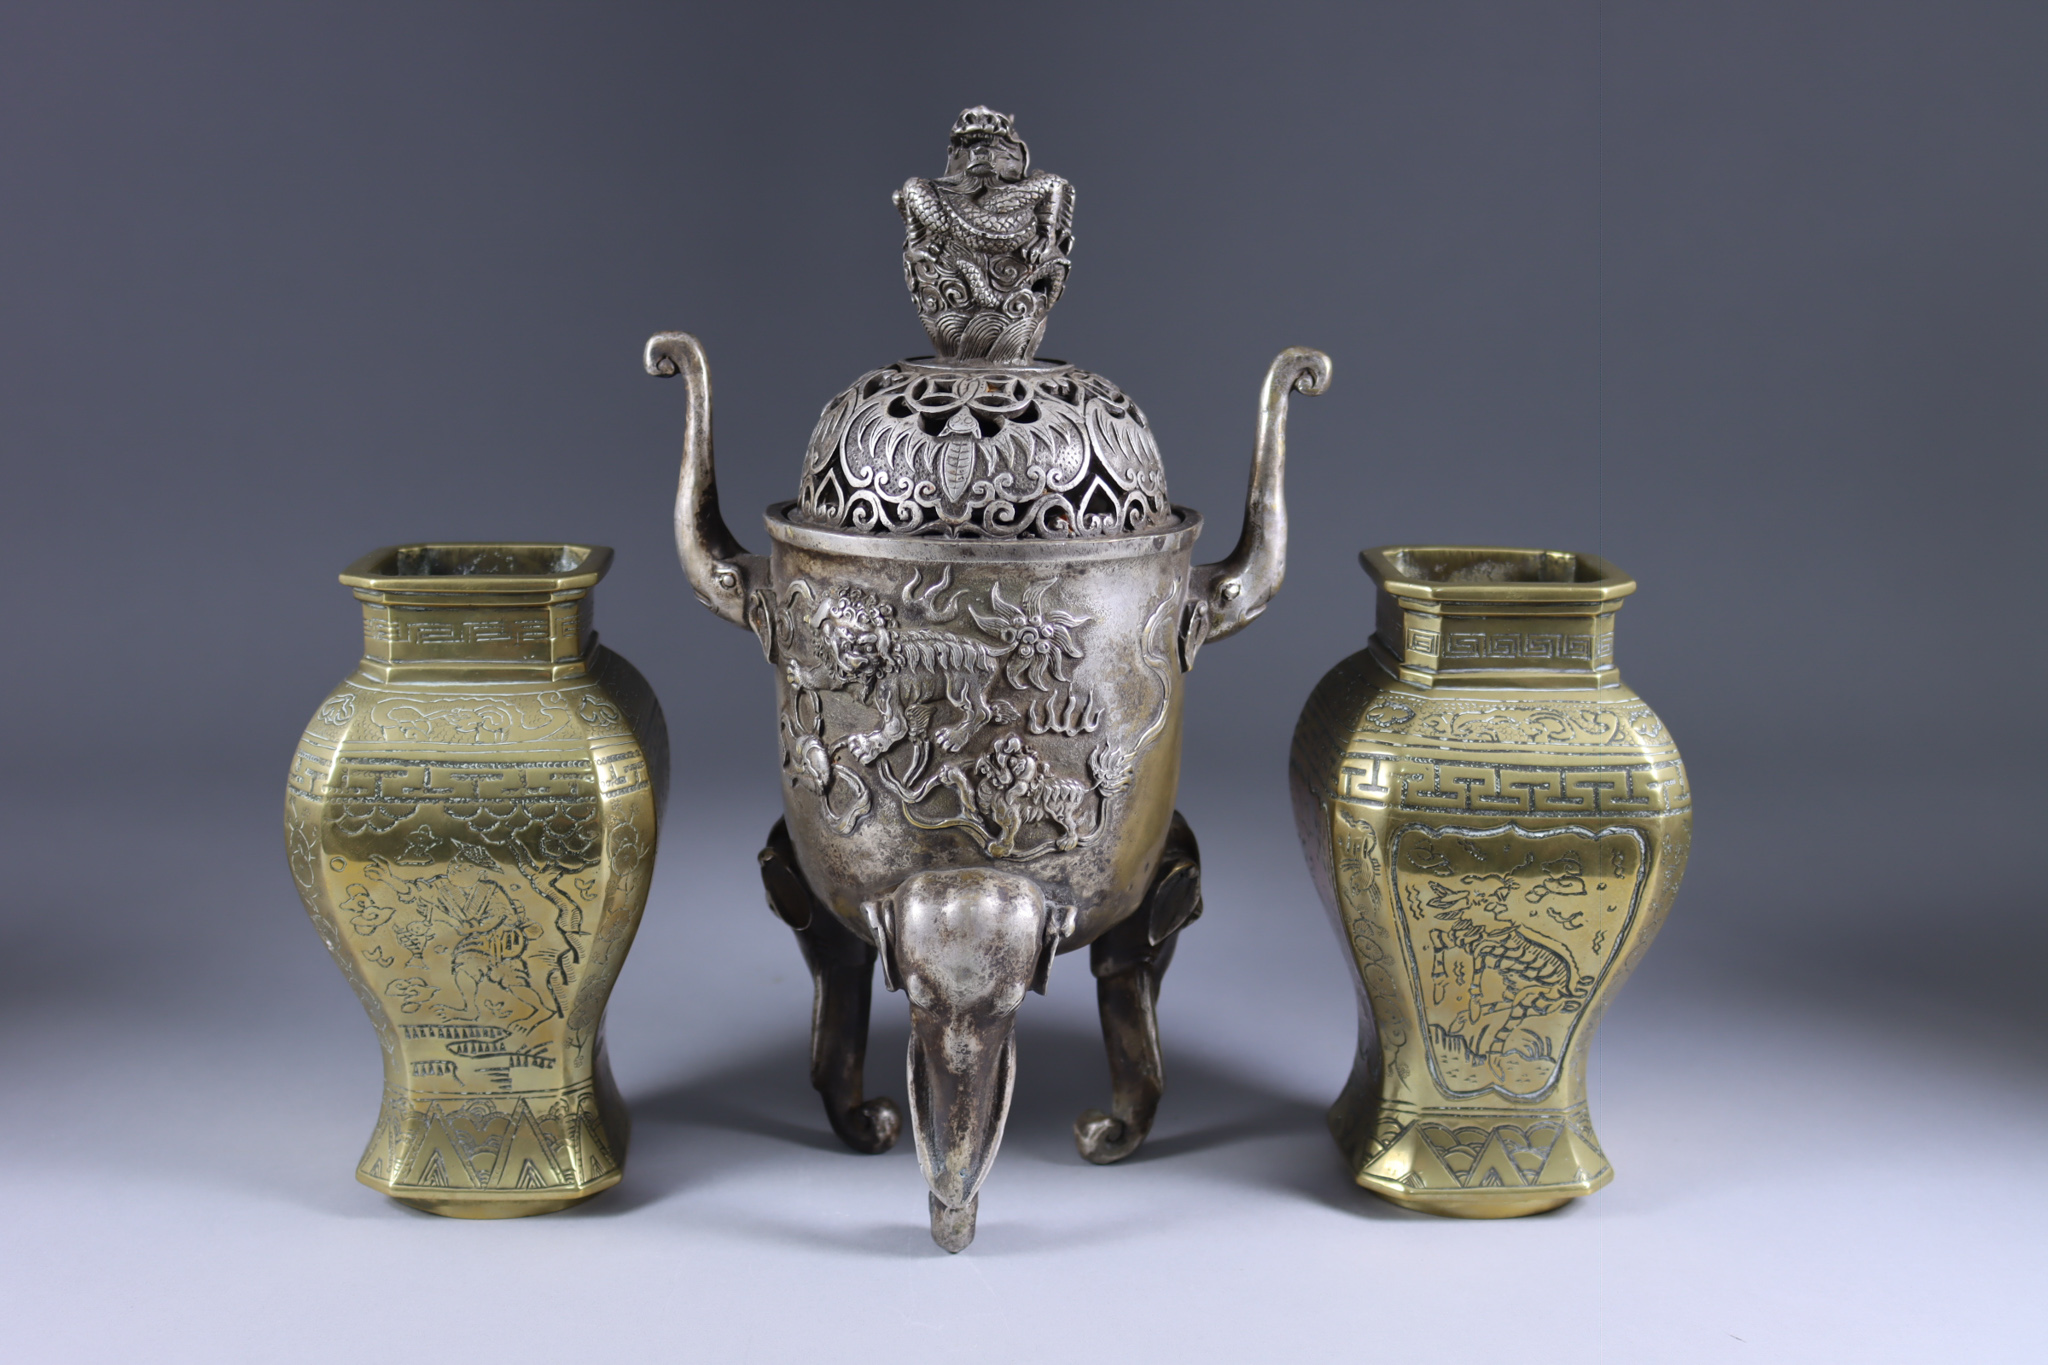 A Chinese Silvered Bronze Two-Handled Censer and Cover, 19th/20th Century, the body cast with